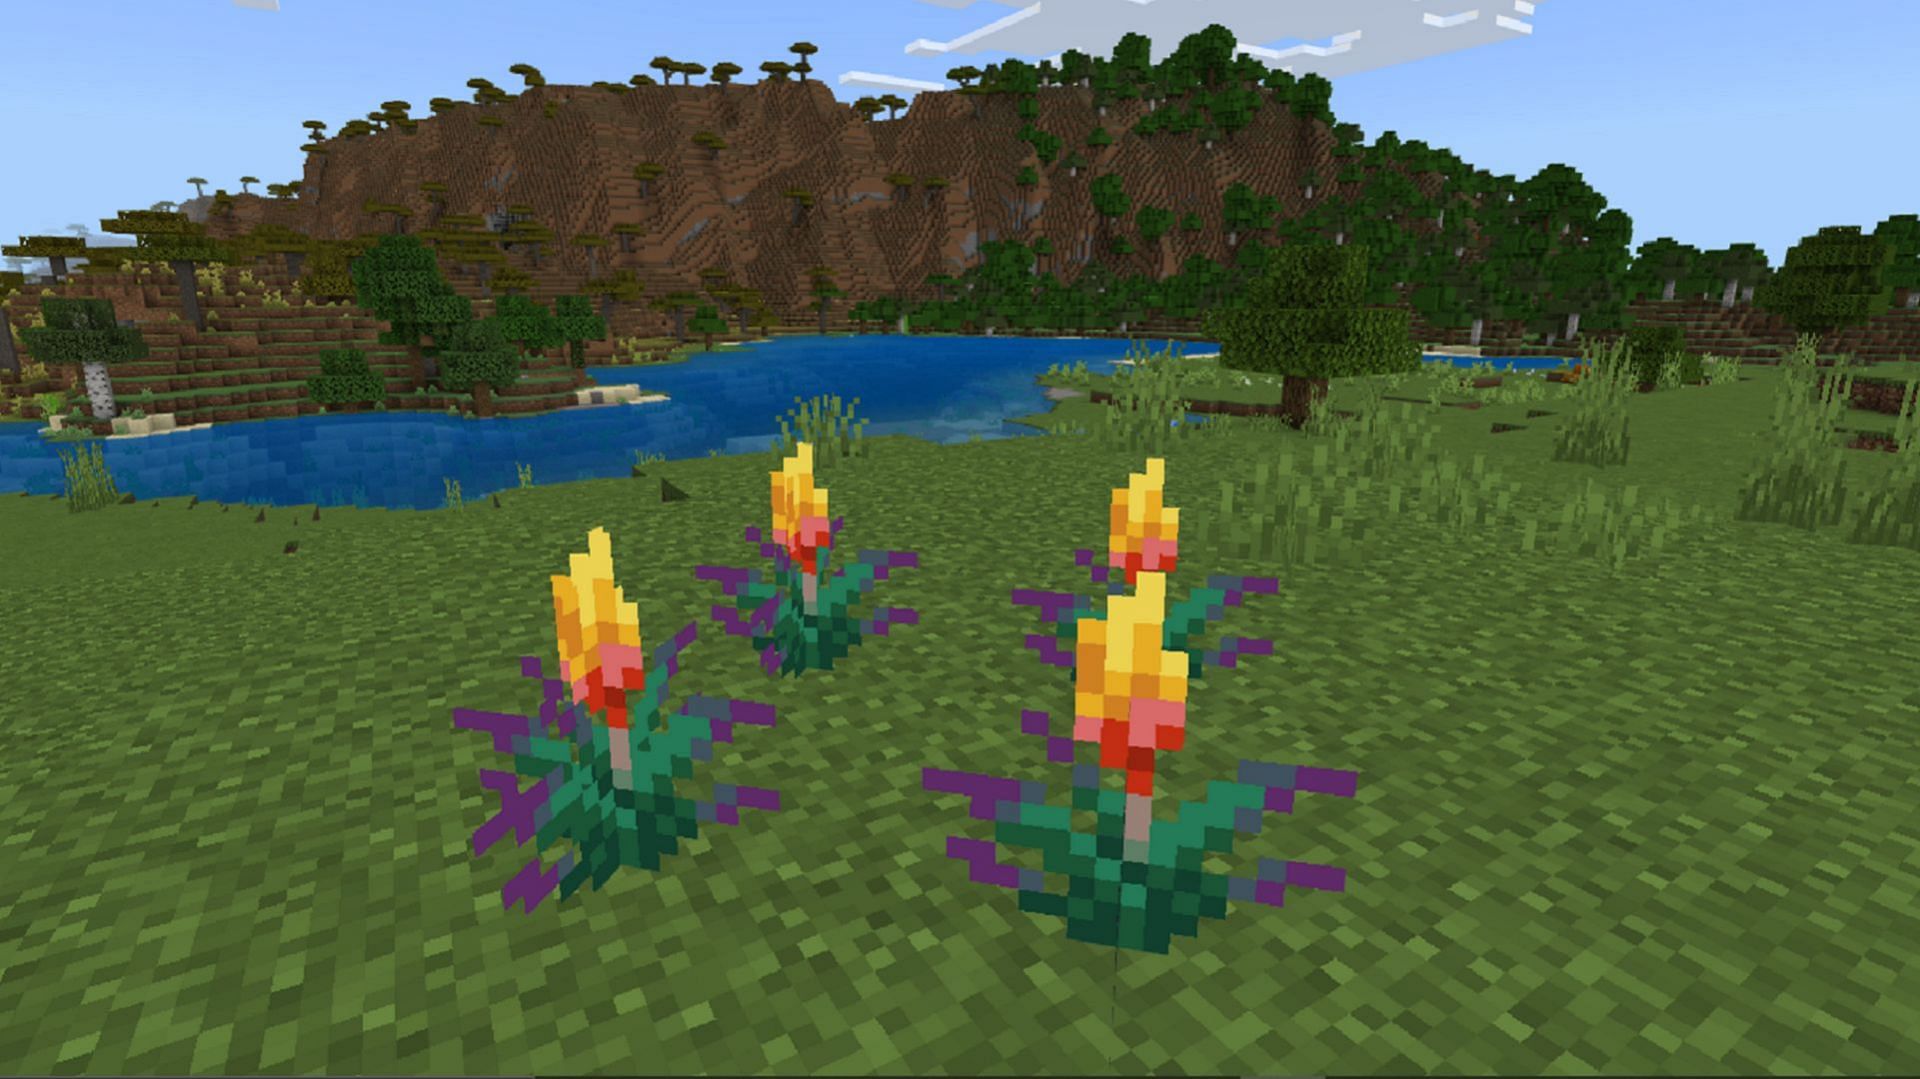 Torchflowers are a new plant type slated to be released in Minecraft 1.20 (Image via Mojang)